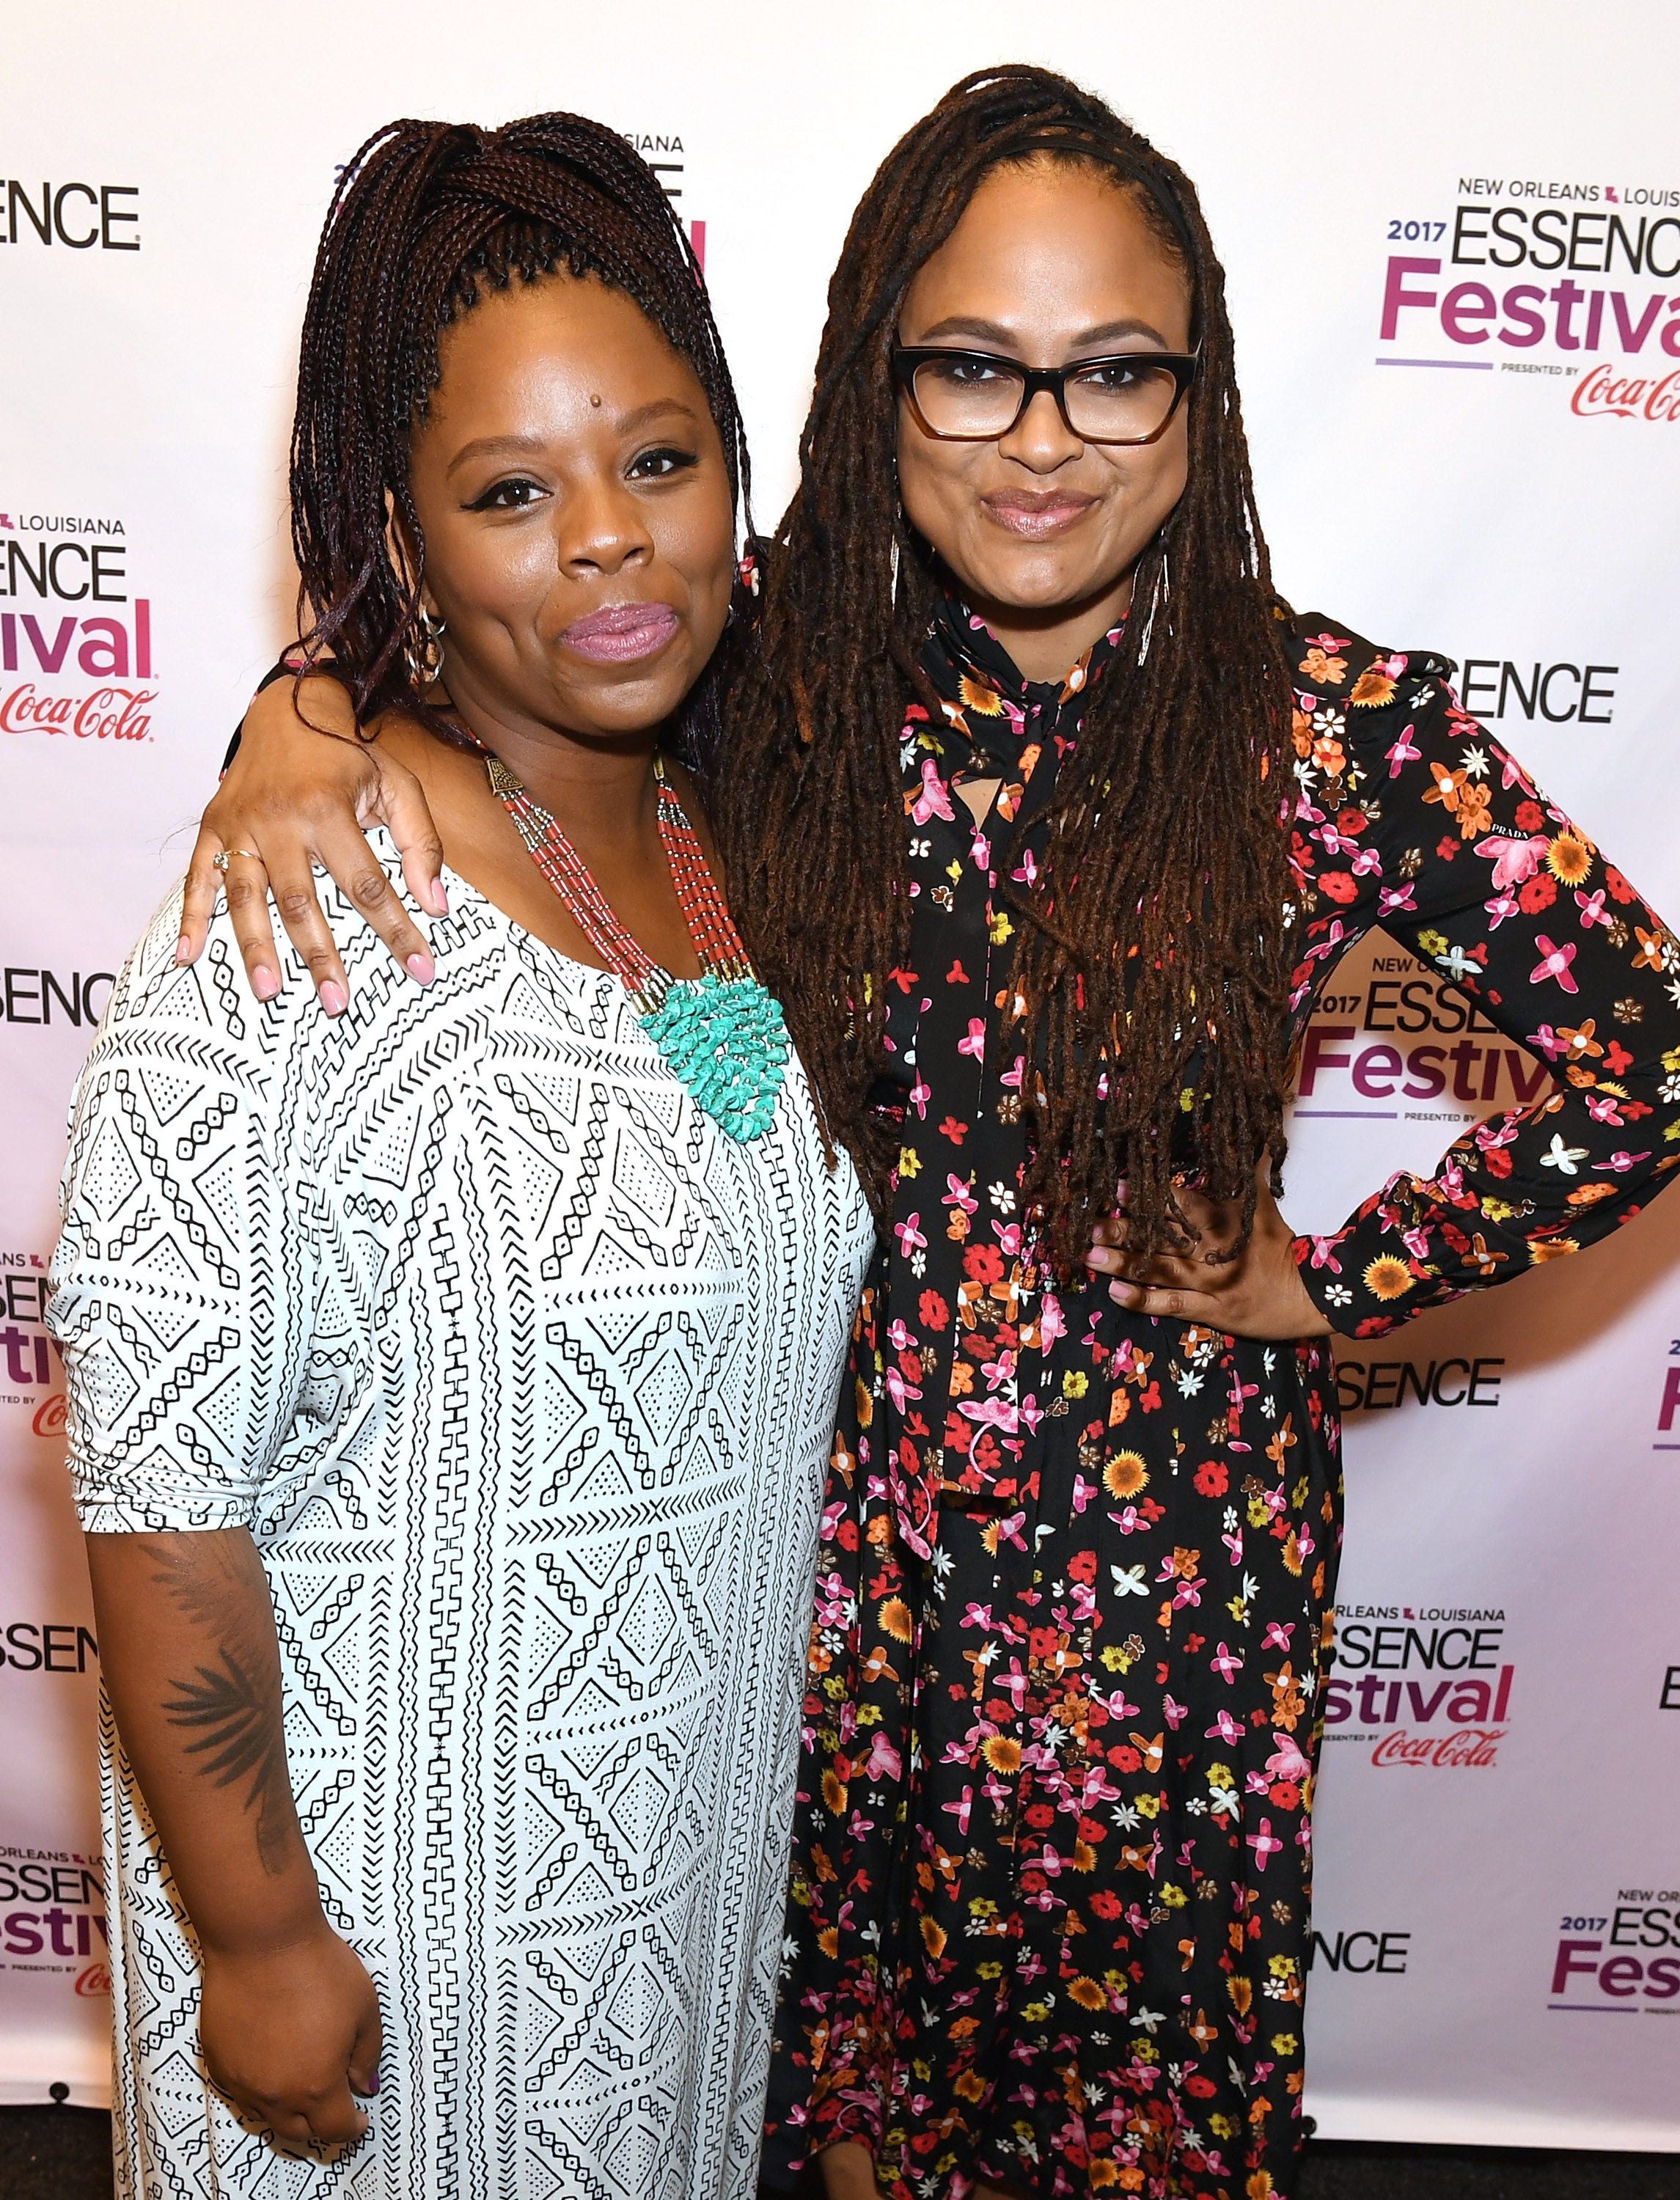 Ava DuVernay and Patrisse Cullors On The Power Of Activism
